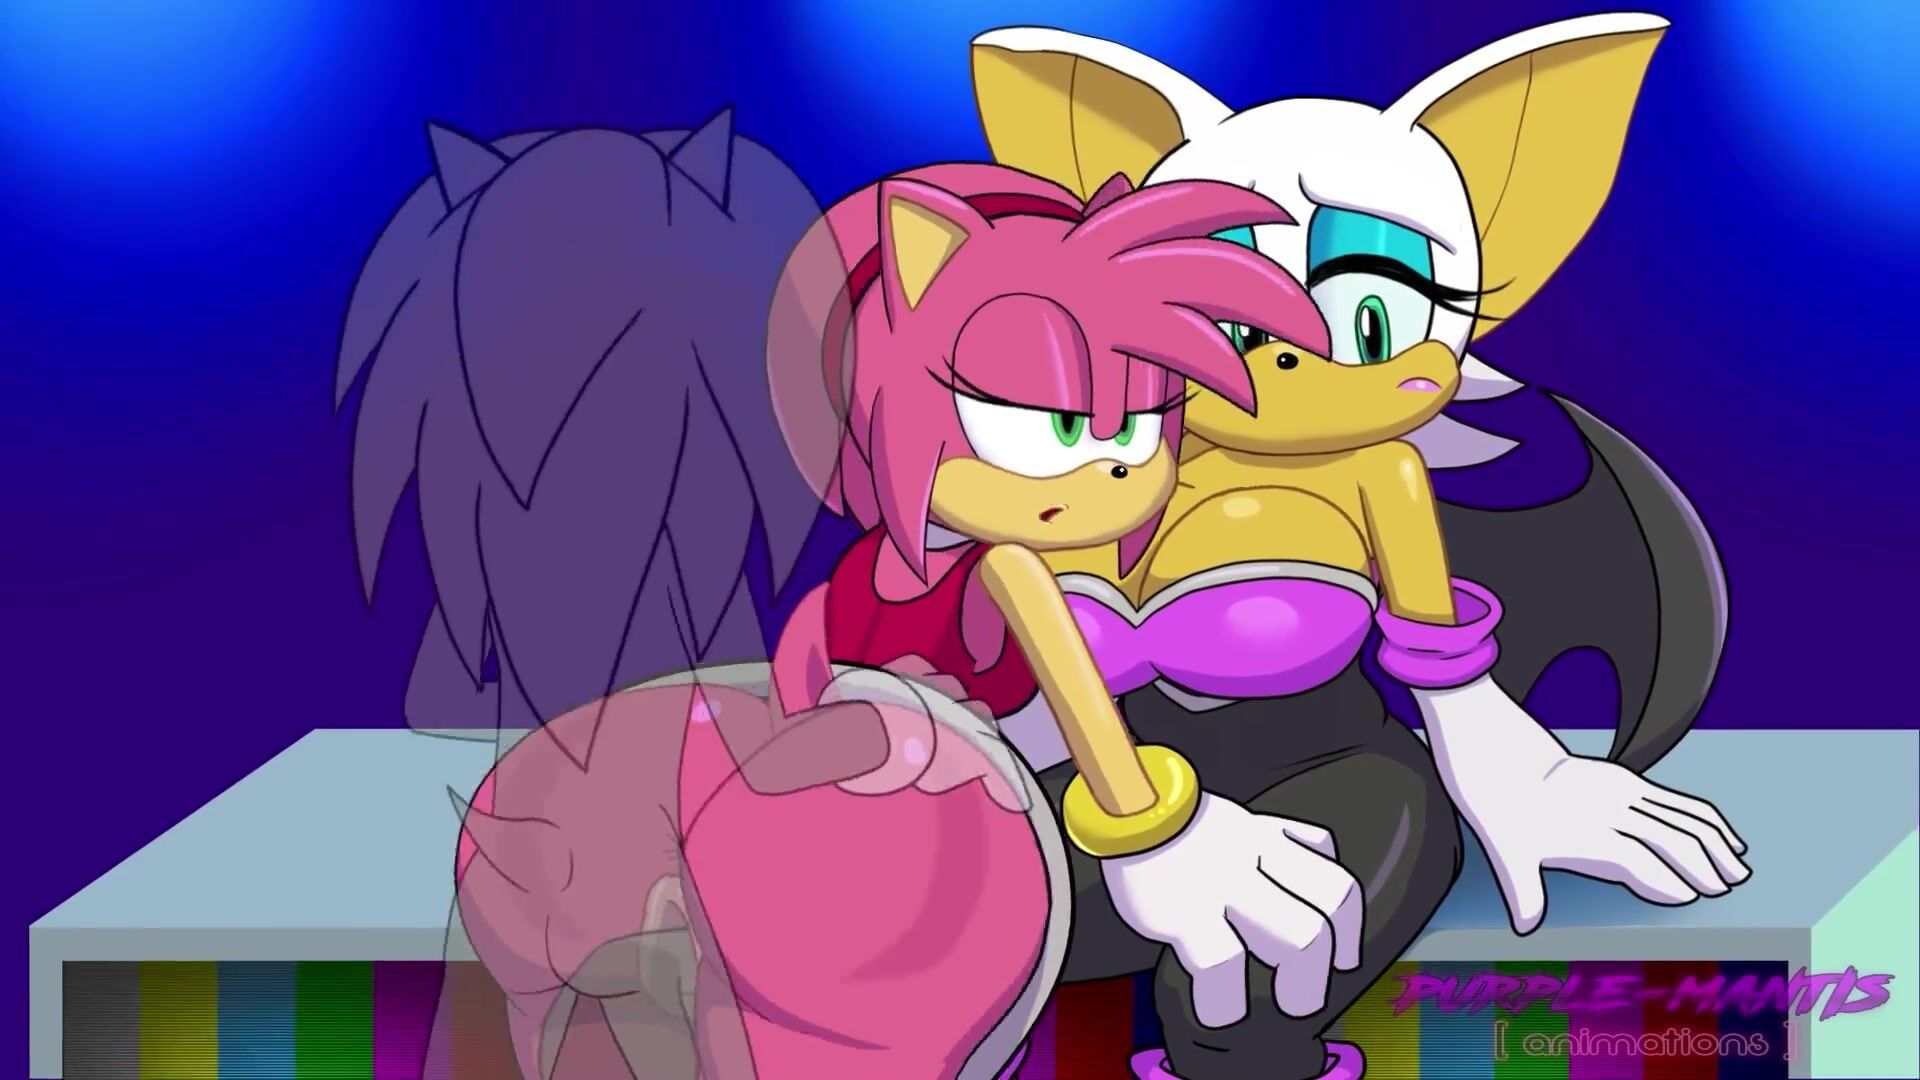 Rouge The Bat Watches Amy Rose Get Plowed - FAPCAT